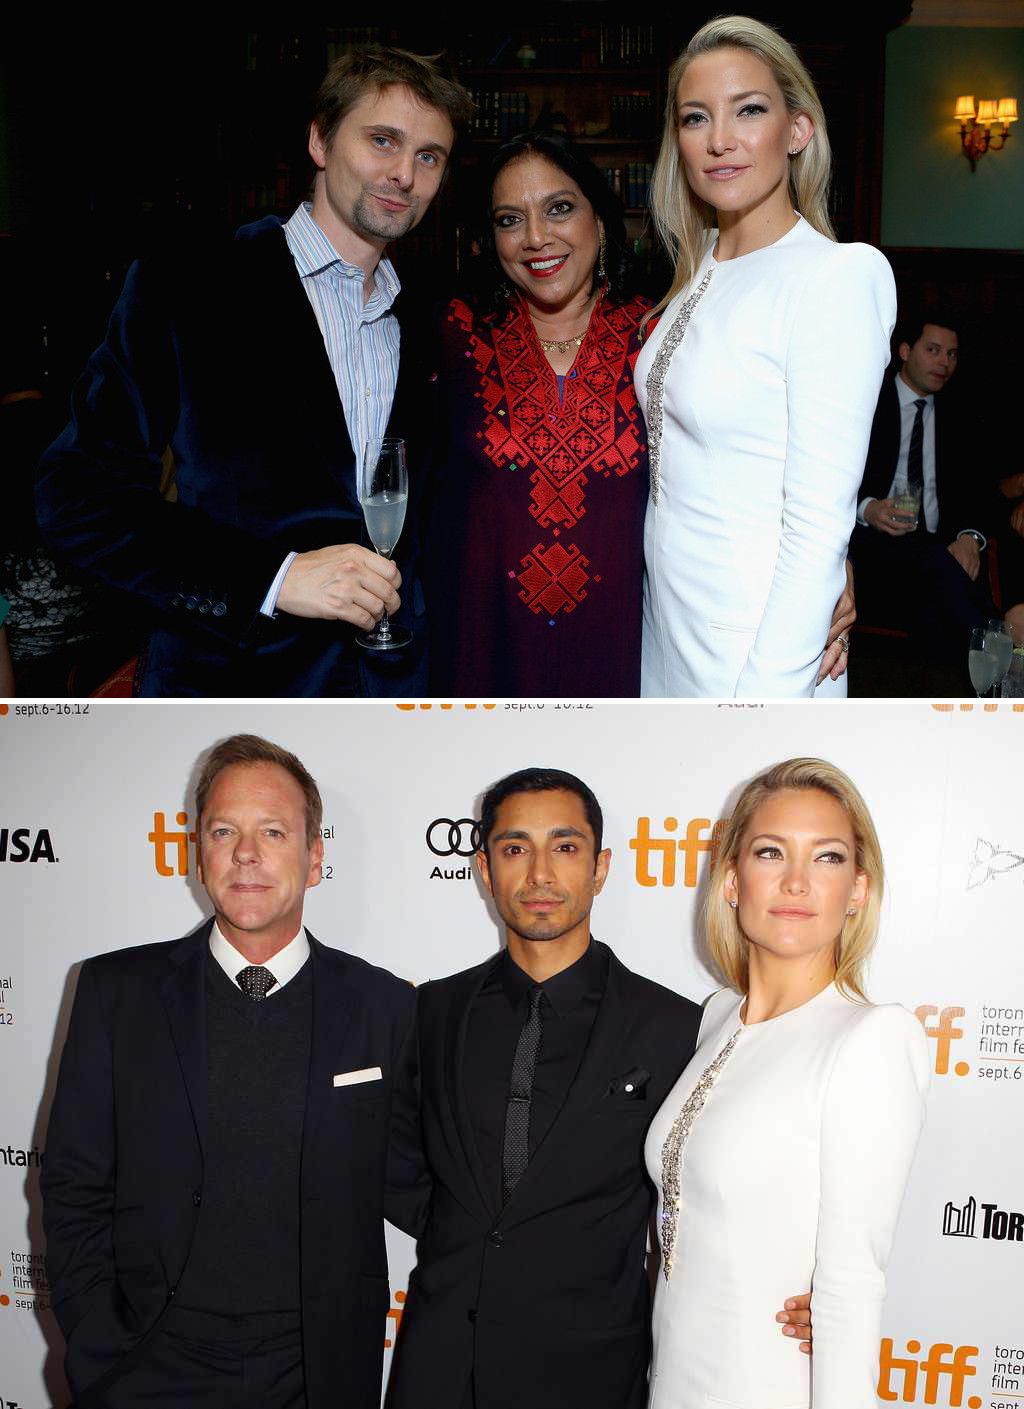 TIFF premiere of "The Reluctant Fundamentalist"